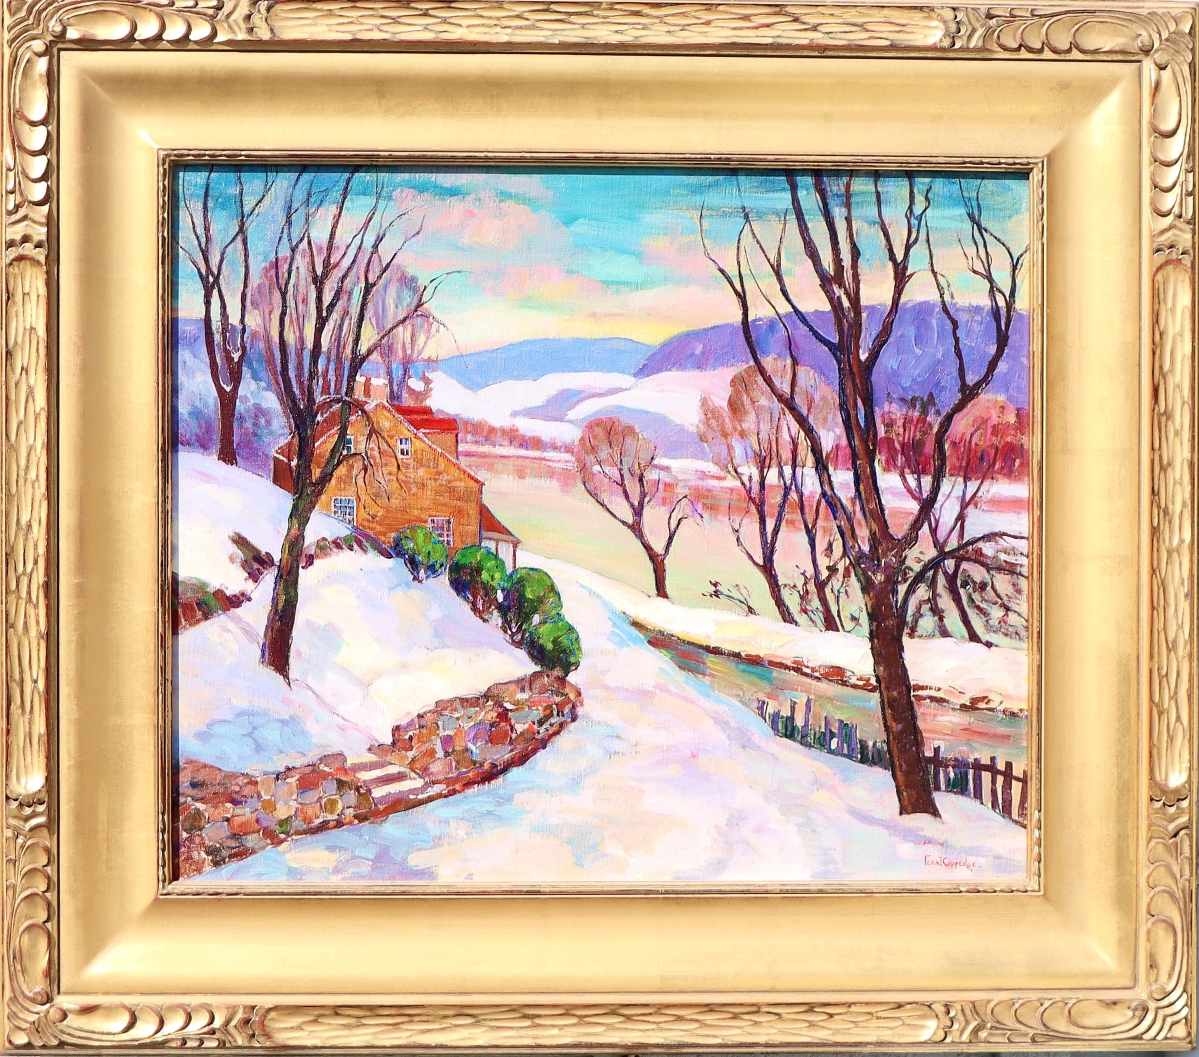 The sale’s top lot was Fern Isabel Kuns Coppedge’s (1883-1951) oil on canvas, “Green and Gold,” a winter landscape of a snow-covered Boxwood, which she designed and built with architect Henry T. MacNeill in New Hope in 1929. Over the years Fern painted dozens of pictures of Boxwood (also known as “Boxwood Studio” where she conducted many exhibitions). Estimated $20/30,000, the painting, 20 by 24 inches, signed lower right, sold for $57,000.